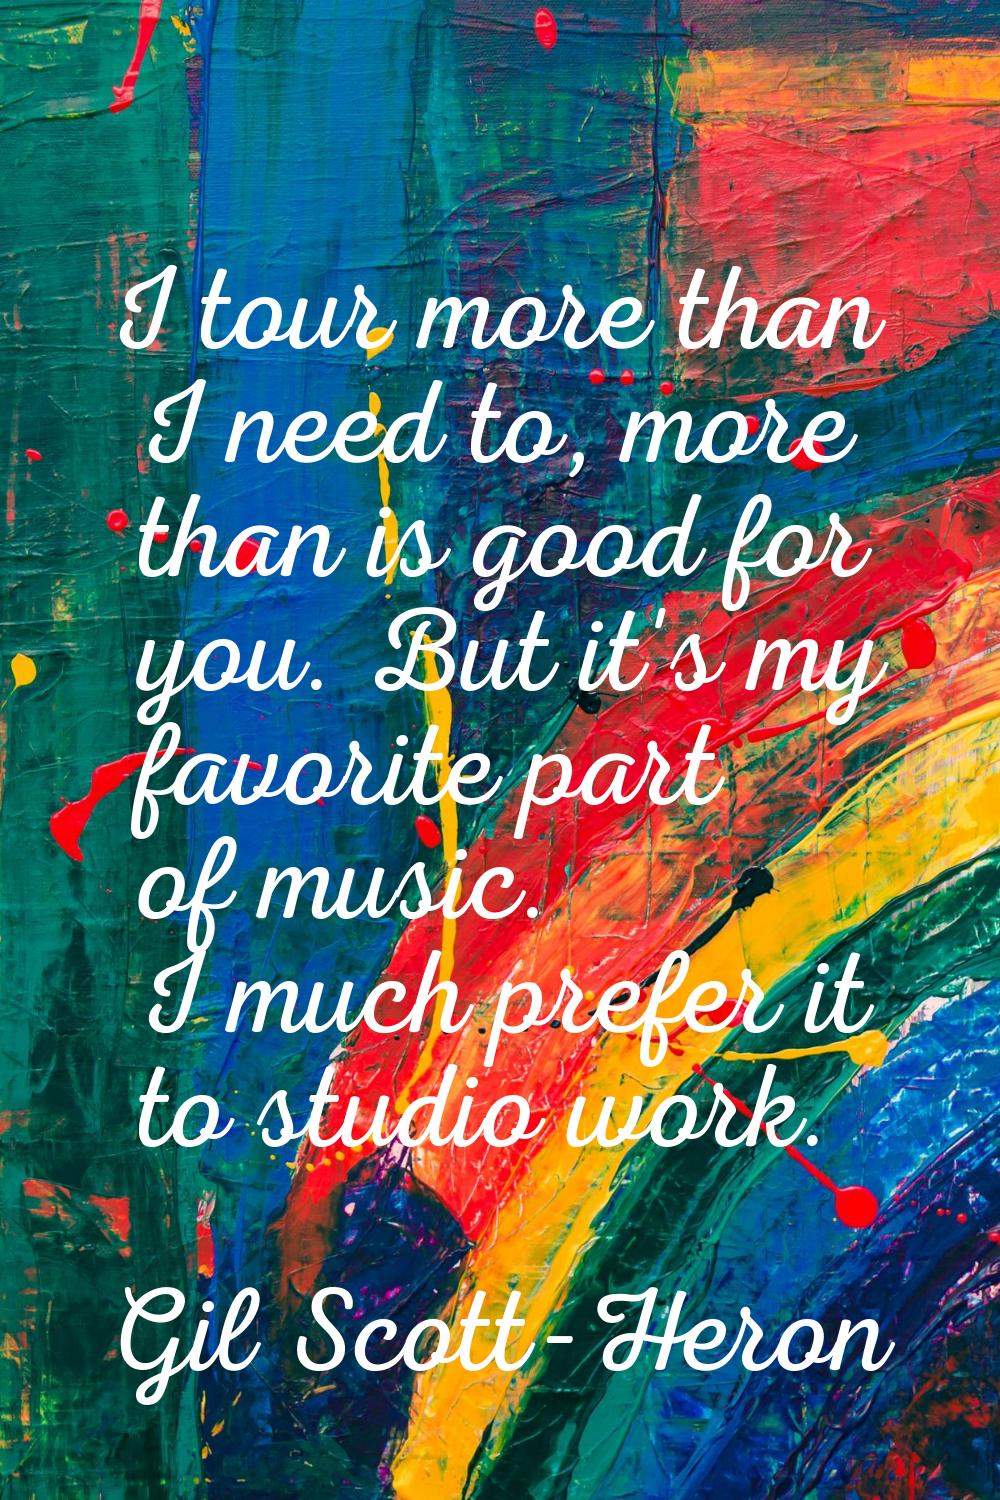 I tour more than I need to, more than is good for you. But it's my favorite part of music. I much p